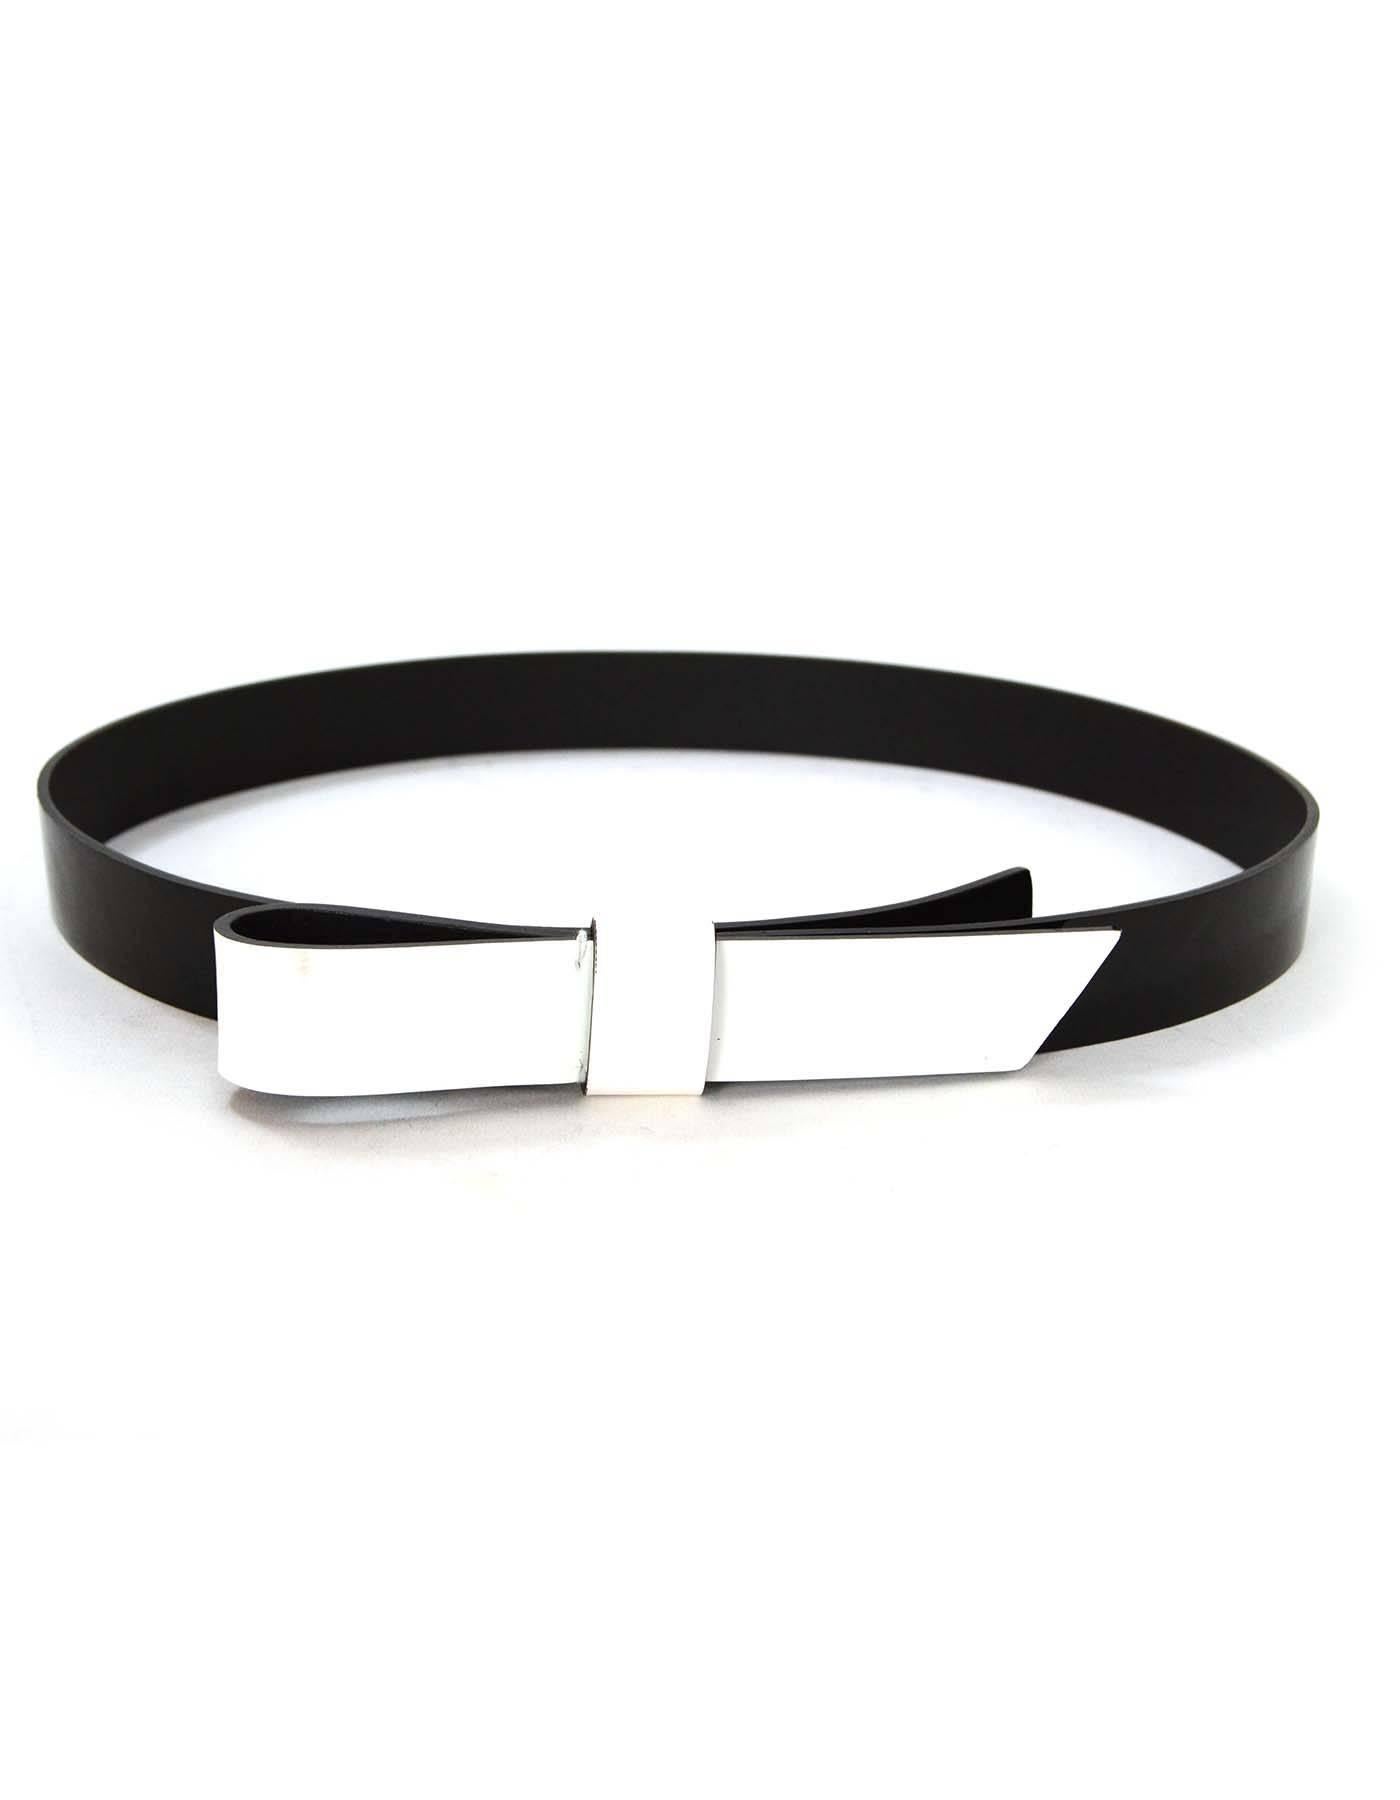 Lanvin Black & White Patent Belt 
Features white patent bow
Made In: Italy
Color: Black and white
Materials: Patent leather
Closure/Opening: Snap buttons
Retail Price: $495 + tax
Overall Condition: Excellent pre-owned condition with the